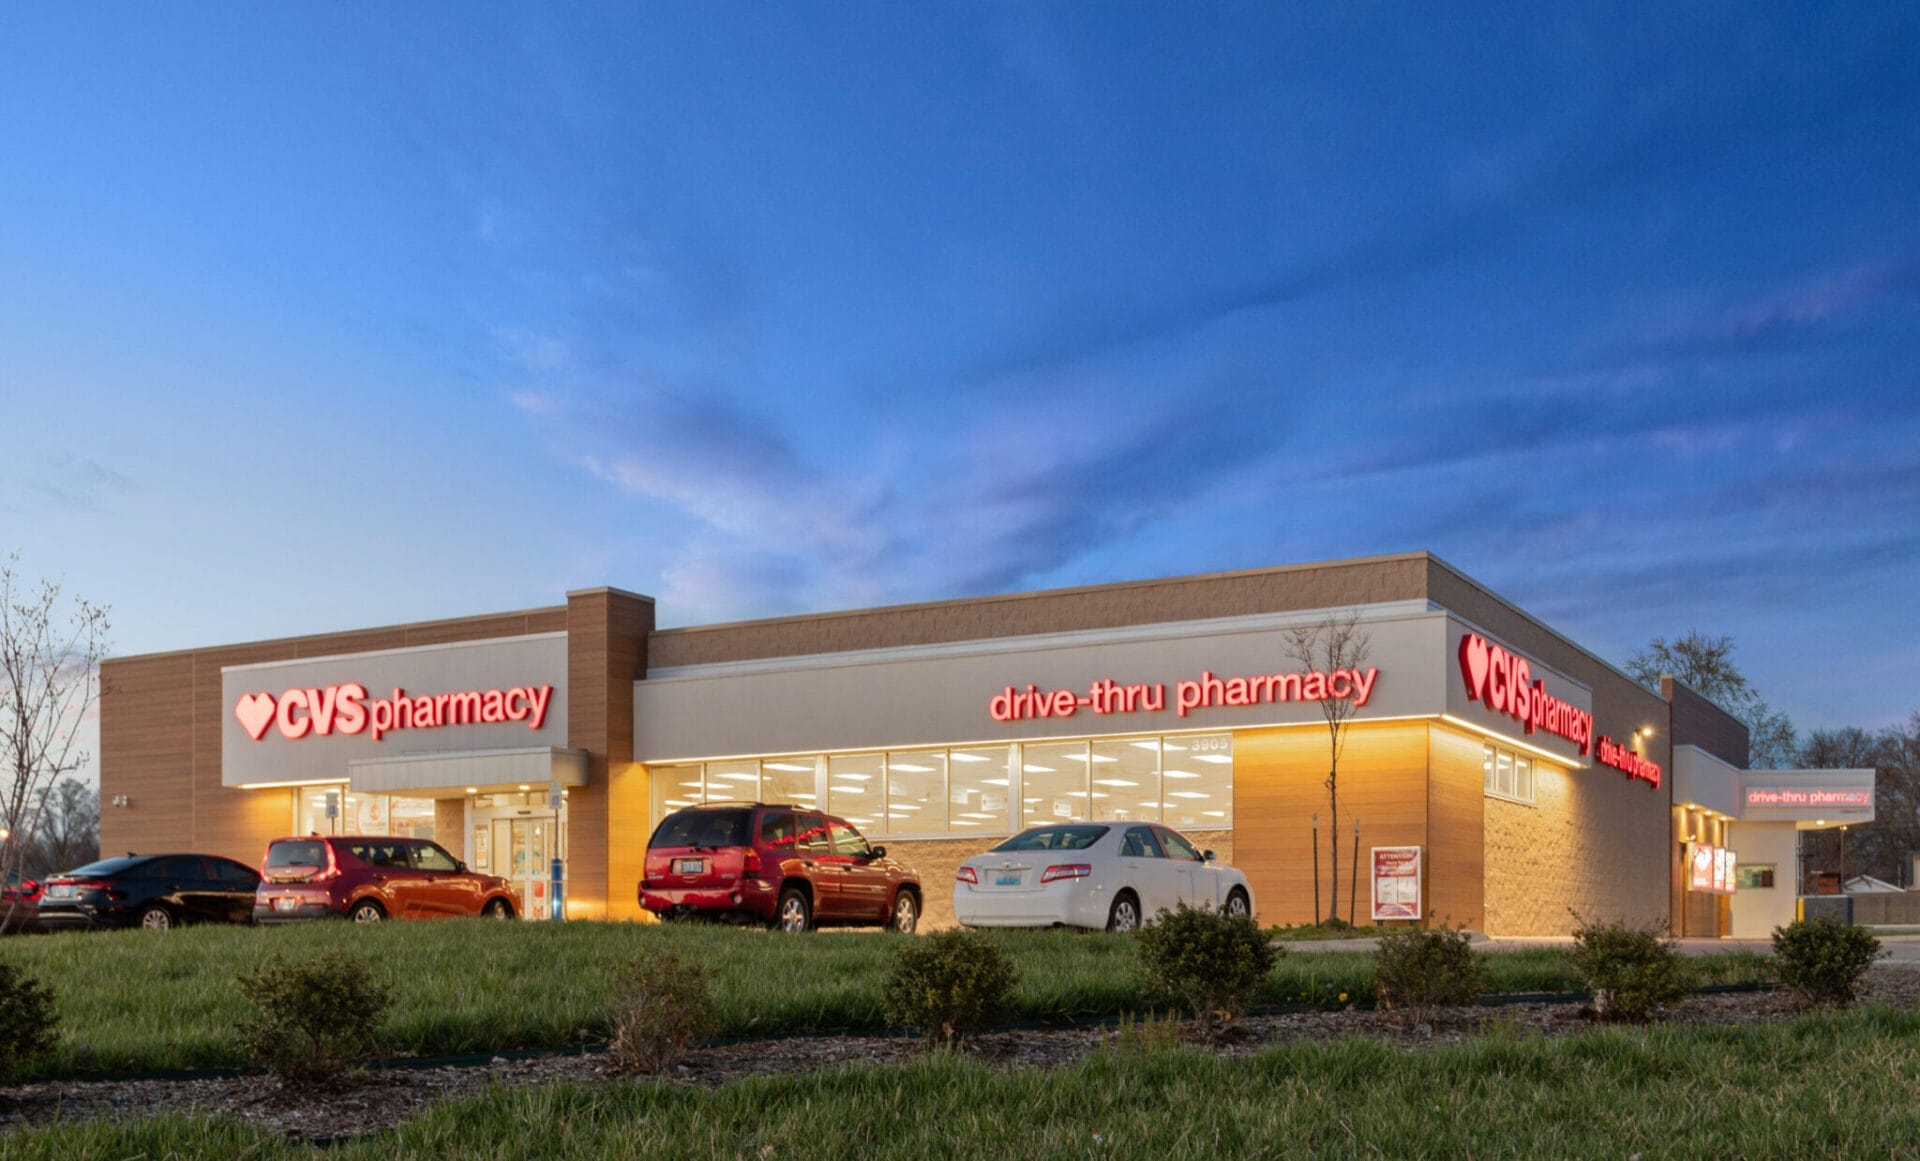 Exterior view of a recently sold CVS Pharmacy store in Louisville, Kentucky, at twilight with illuminated signage and cars parked outside.